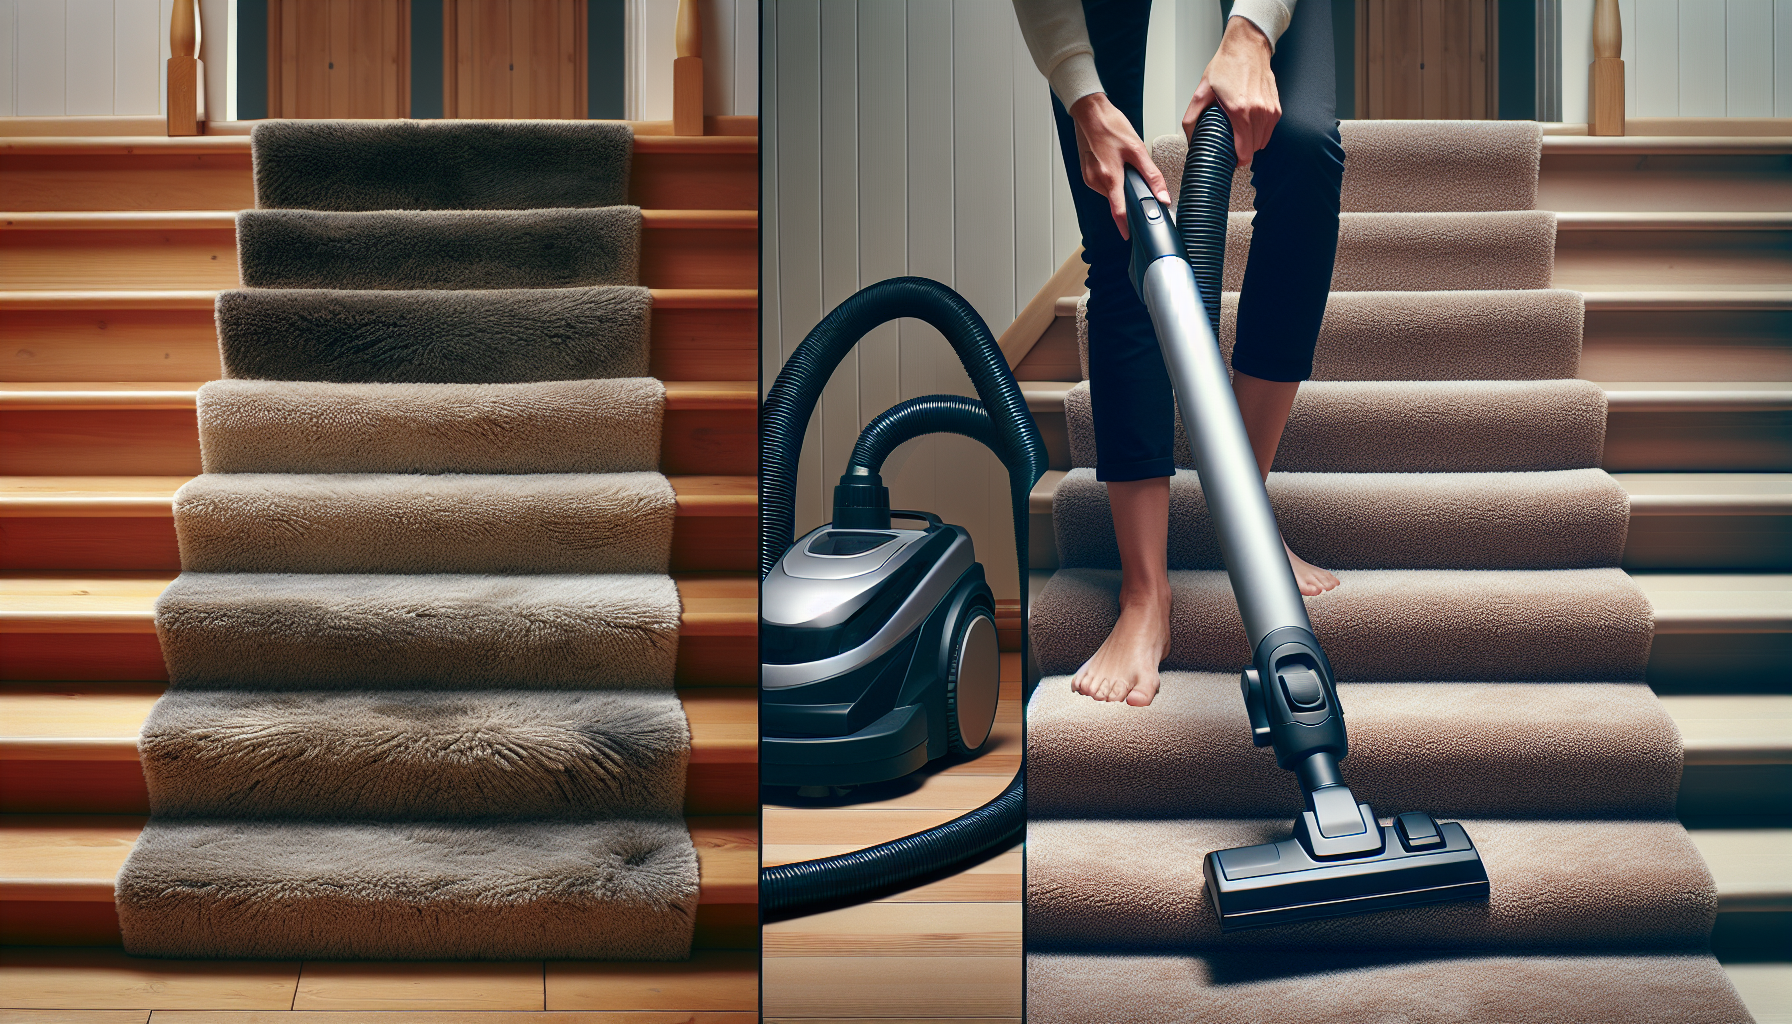 A person using a vacuum cleaner to clean carpeted stairs